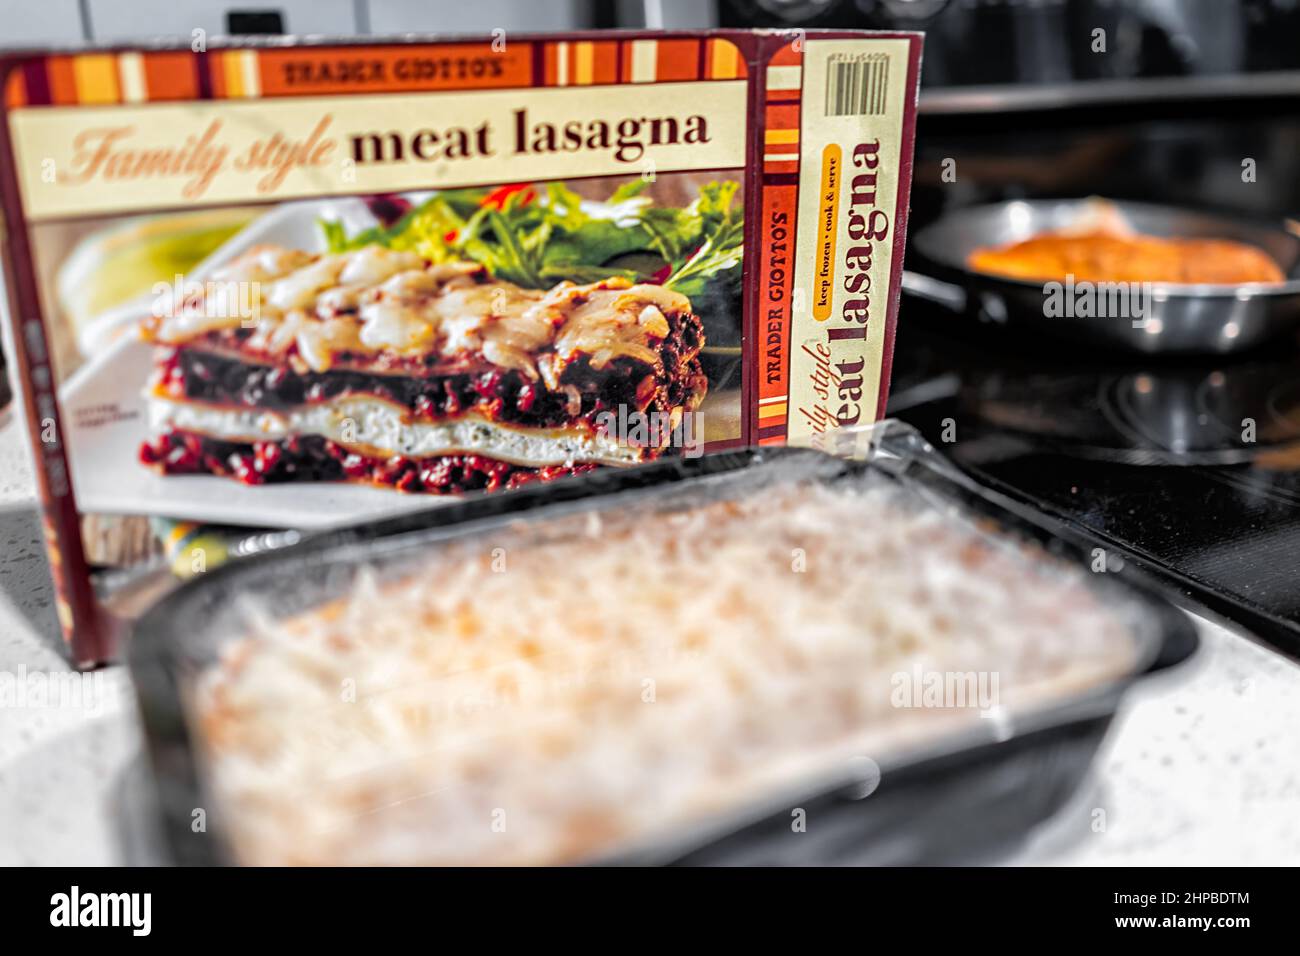 Naples, USA - August 28, 2021: Trader Joe's Italian Family Style Meat Lasagna package with frozen tv dinner tray for oven baking Stock Photo